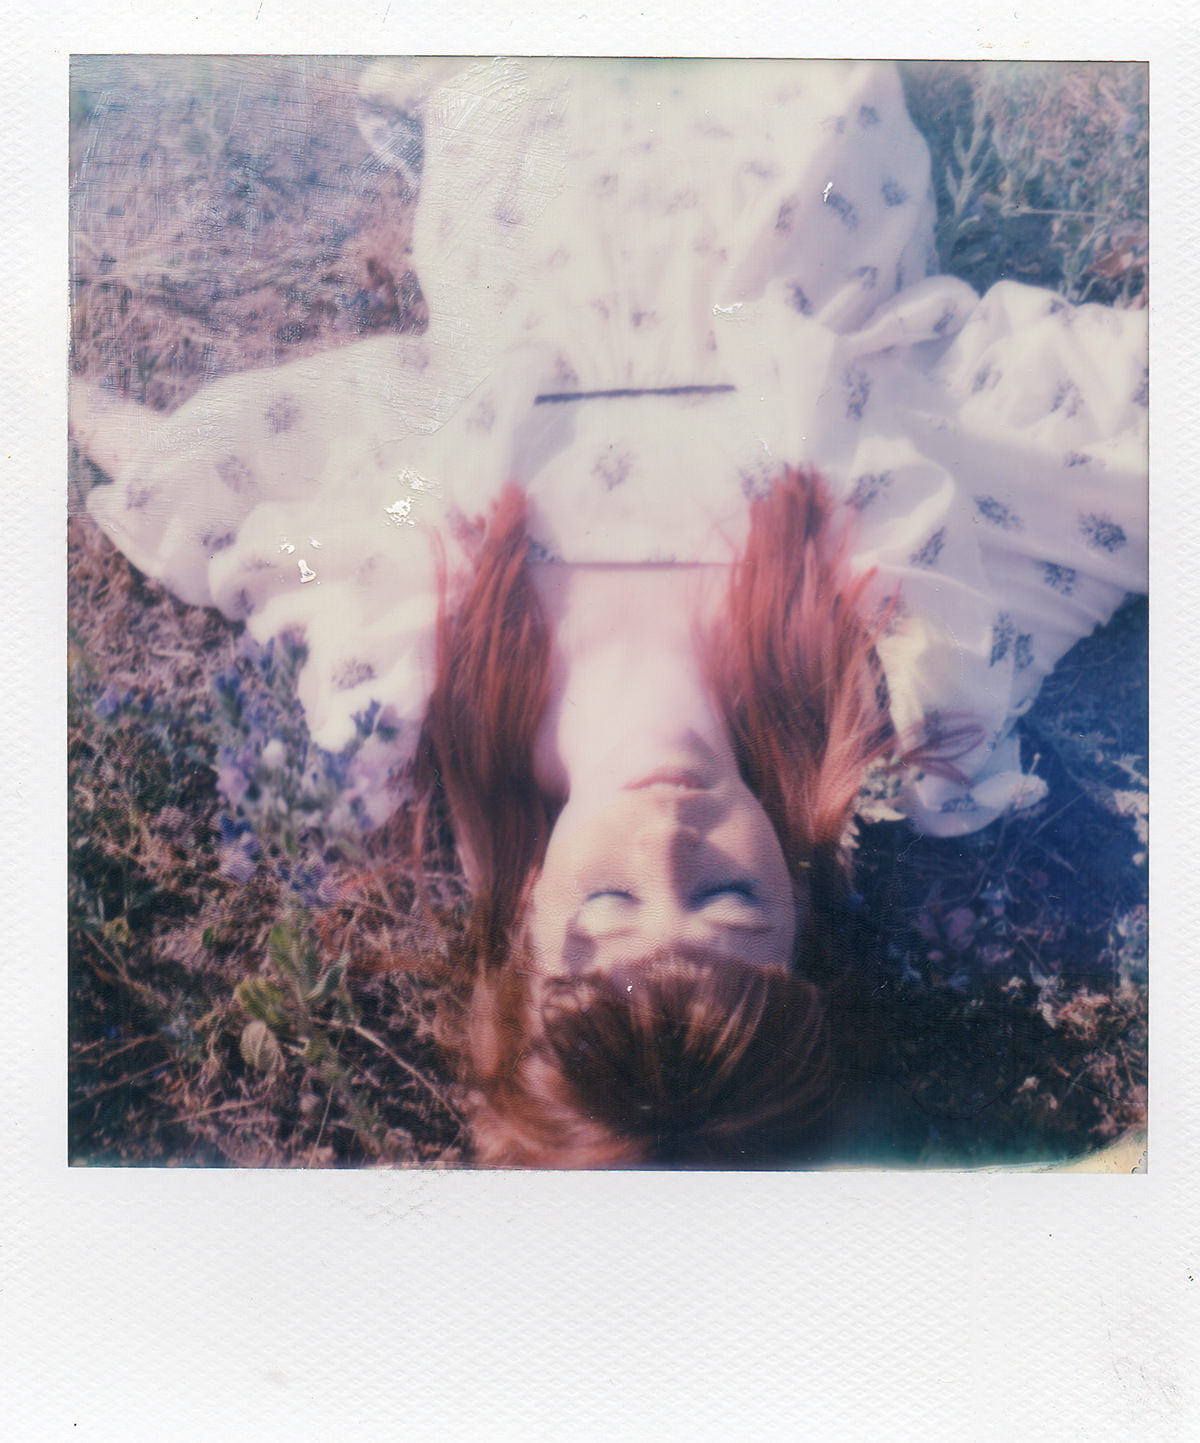 Impossible-Project-Polaroid-Film-Artistic-Quirky-Wedding-Photography-003